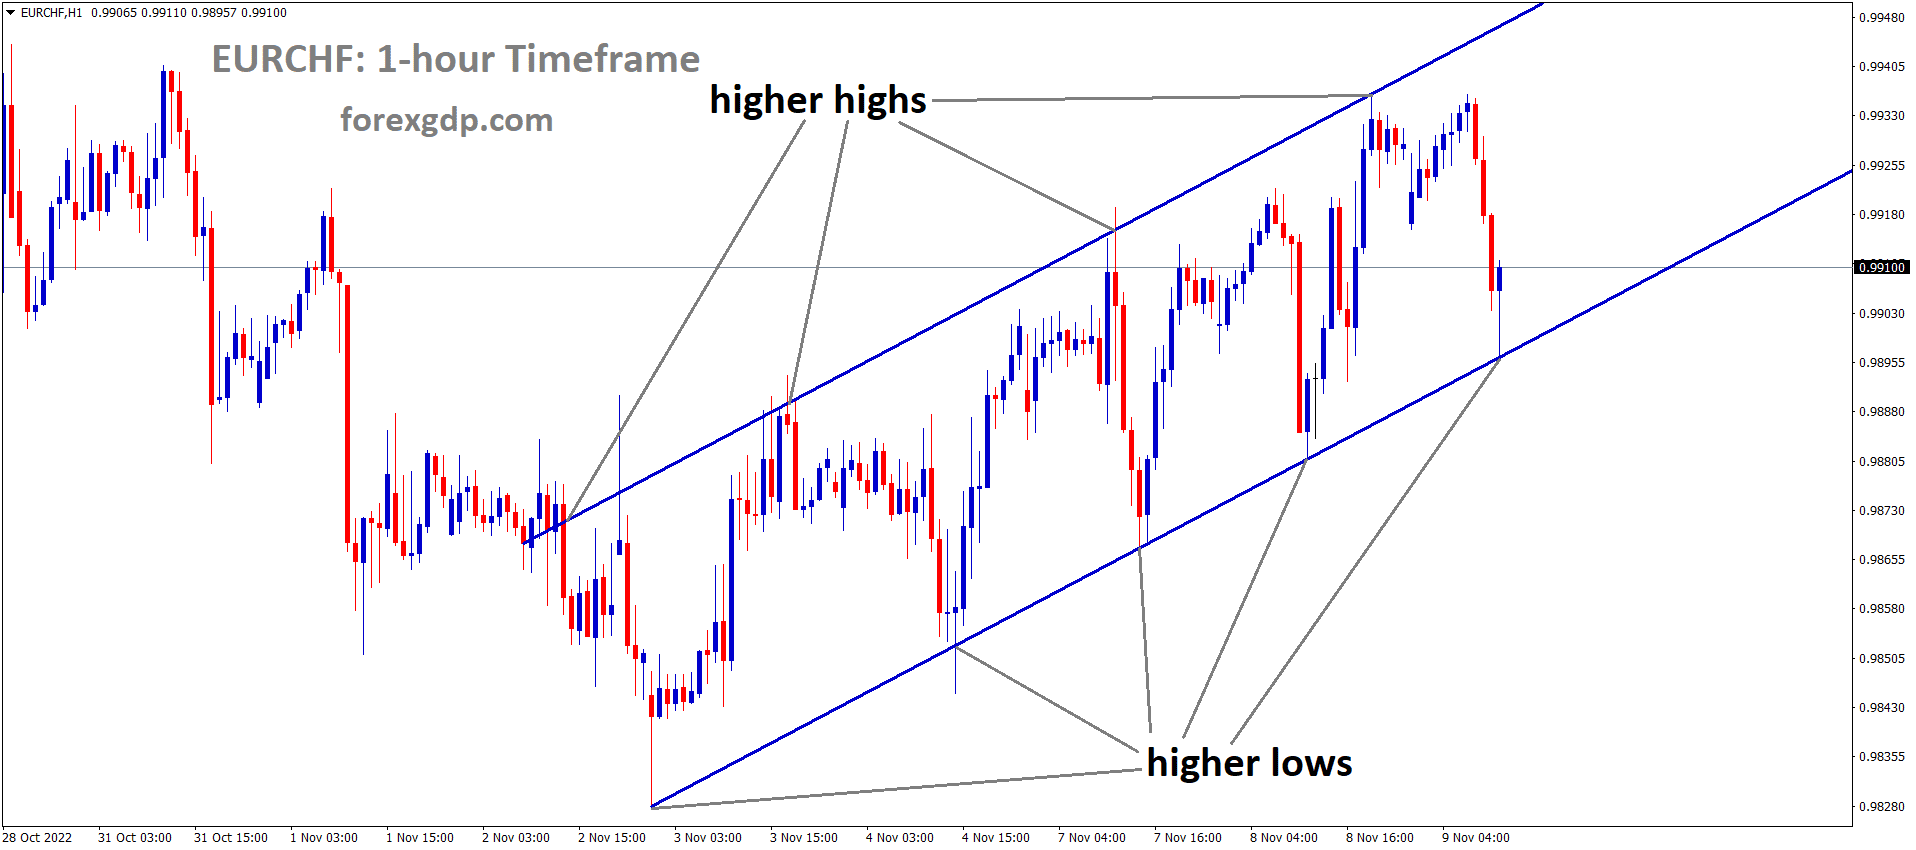 EURCHF is moving in an Ascending channel and the market has reached the higher low area of the channel